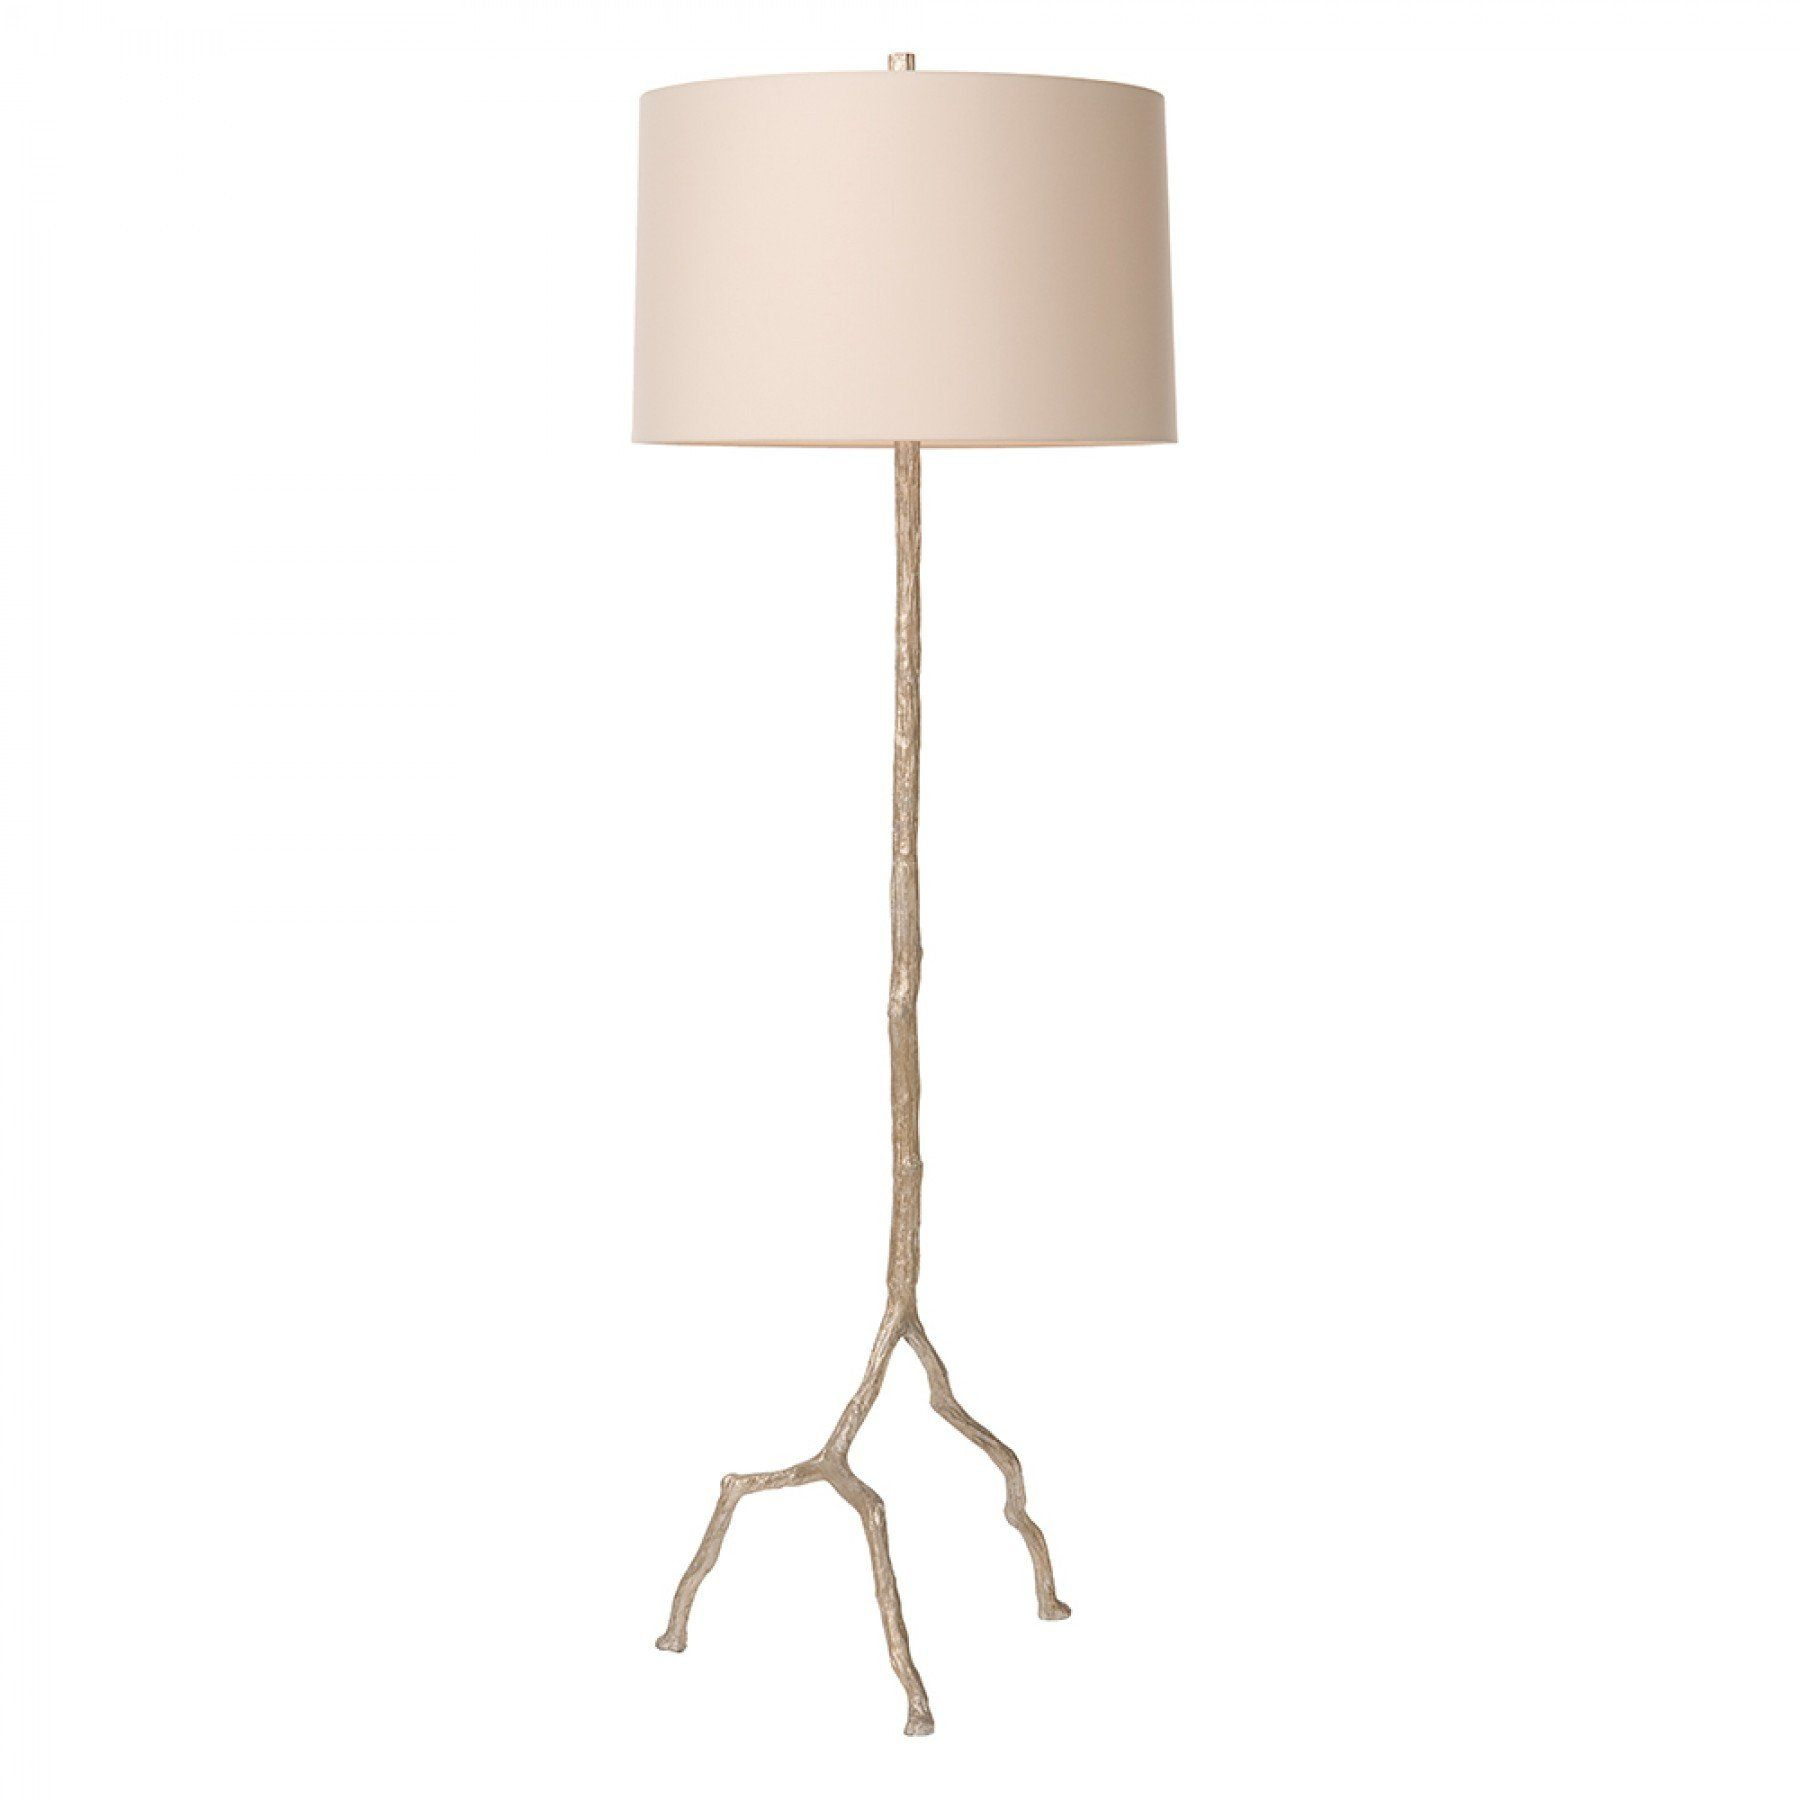 Silver Branches Floor Lamp Products Floor Lamp Lighting pertaining to sizing 1800 X 1800